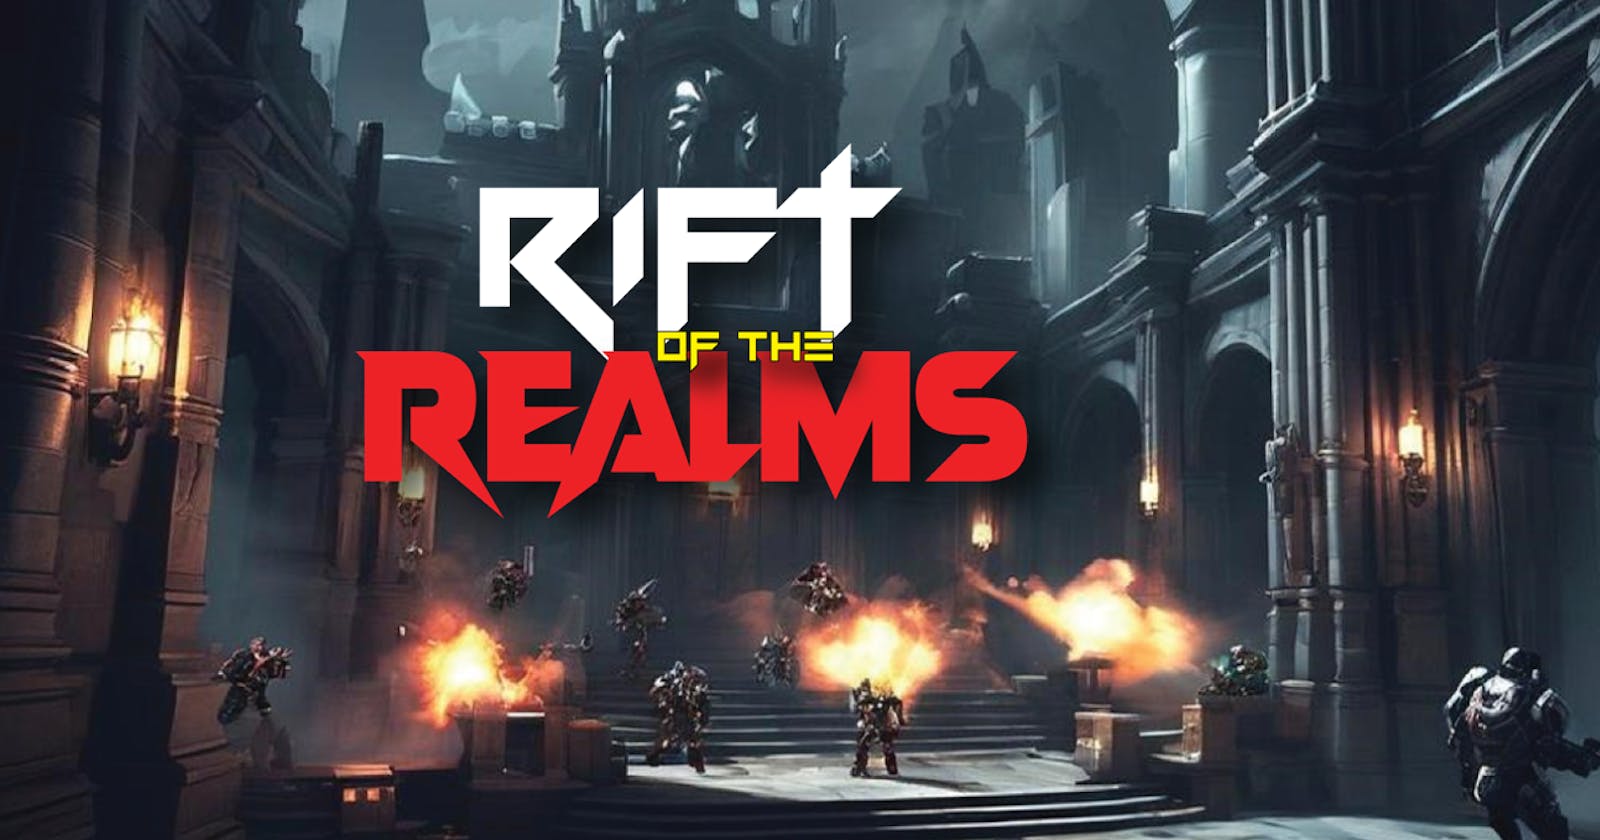 Latest Rift of the Realms Updates